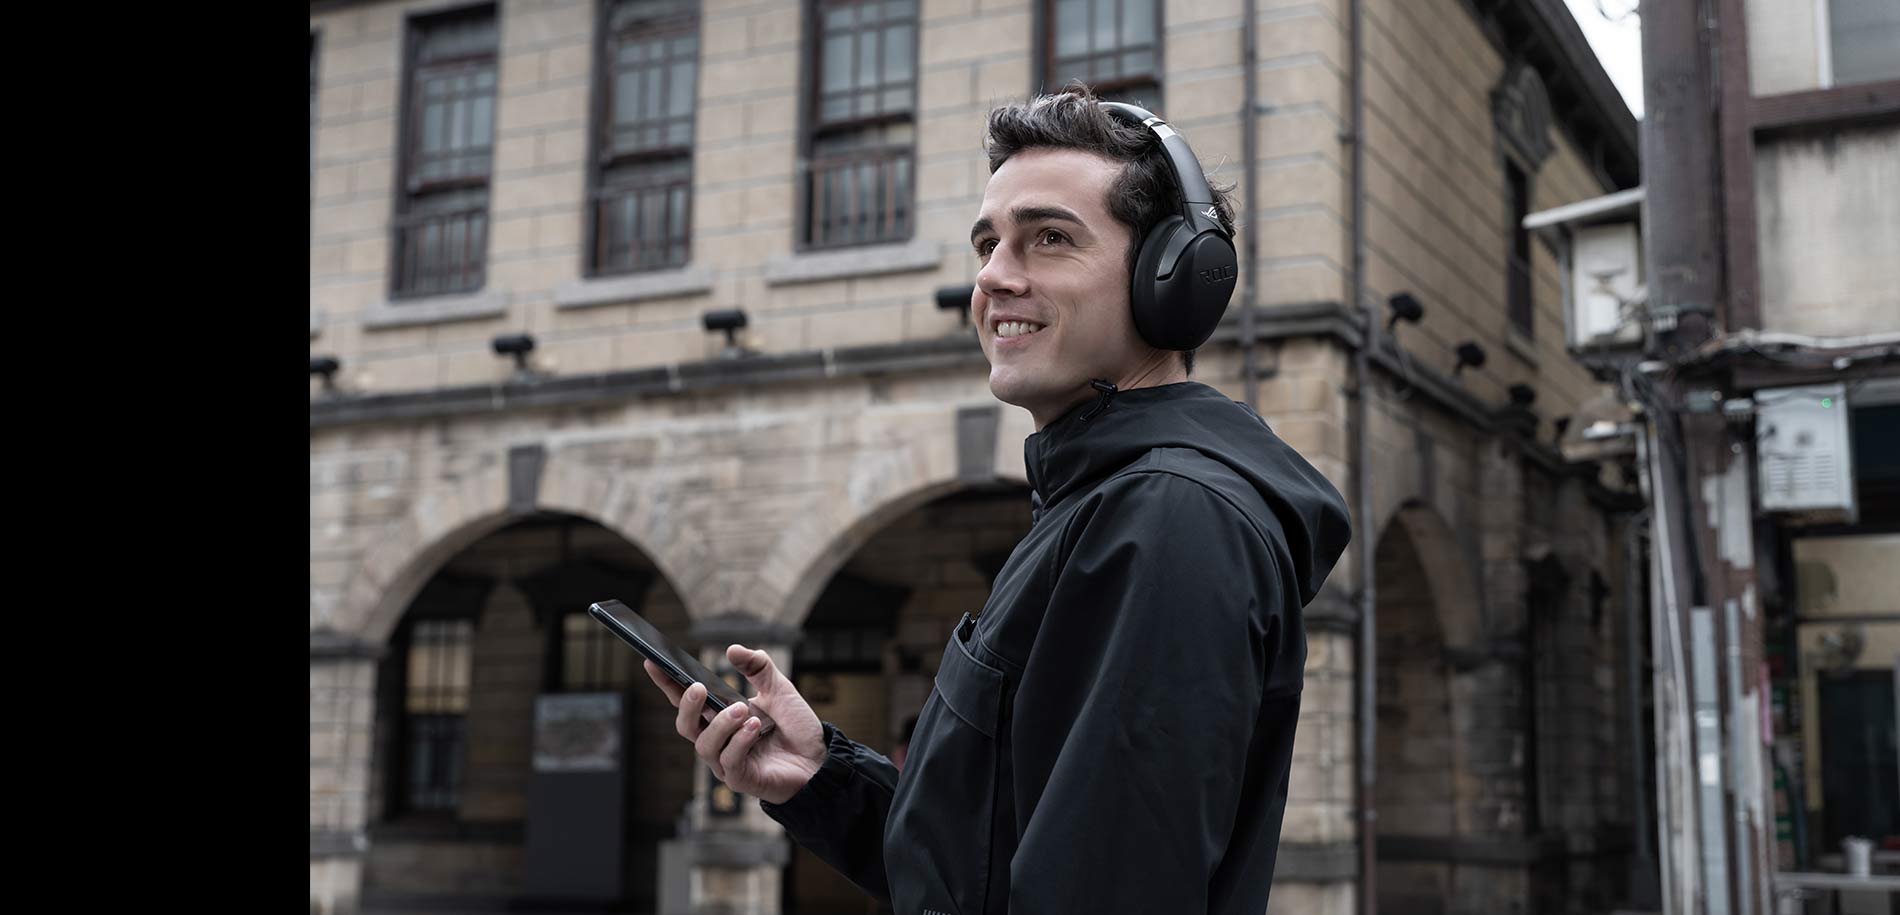 scenario photo demonstrates model is wearing the ROG Strix Go BT, ROG wireless gaming headset, and the phone in hand.